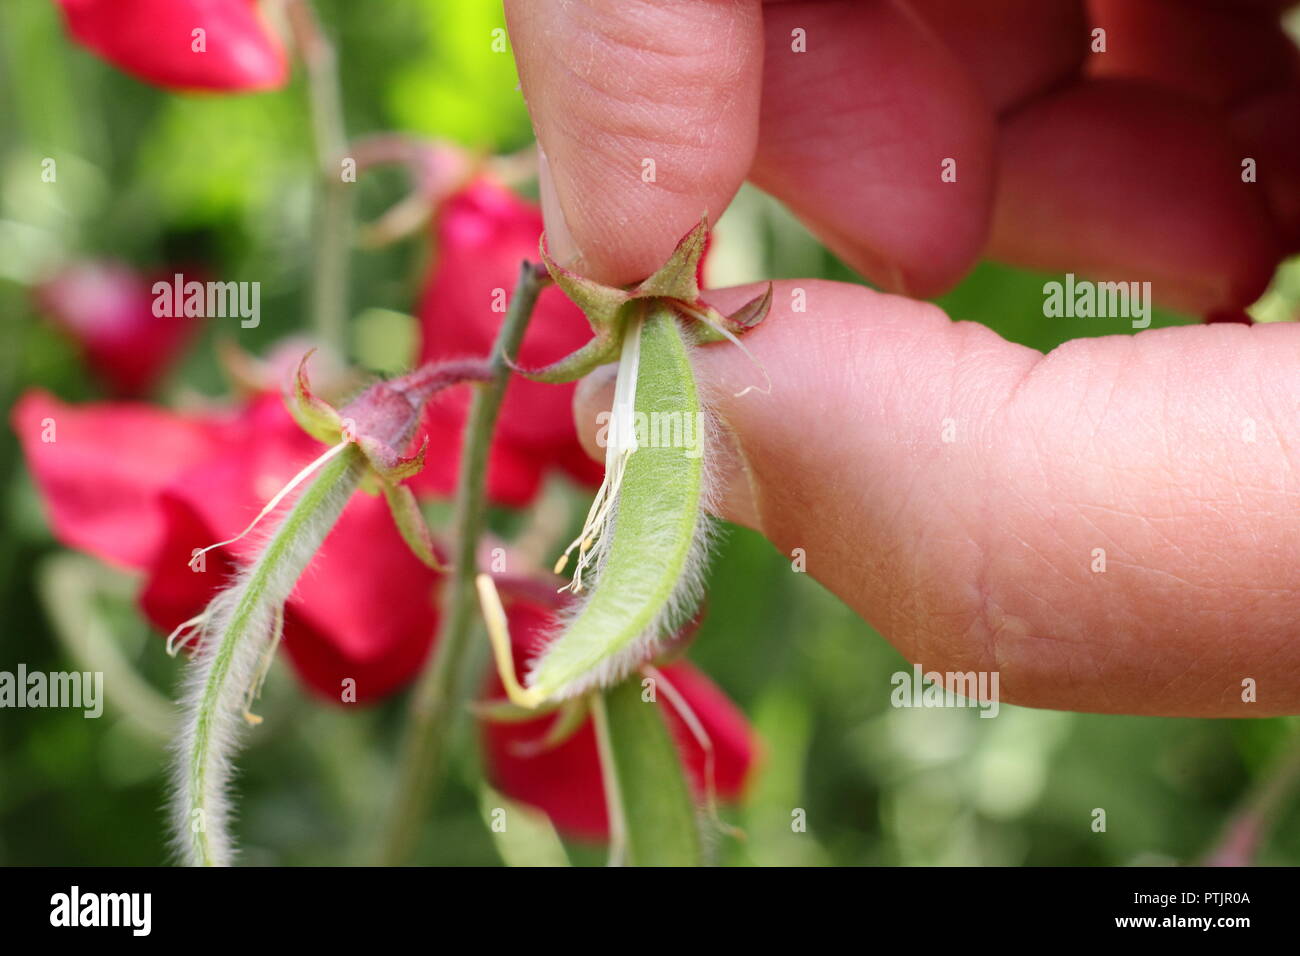 Lathyrus odoratus. Removing pods from sweet pea plant to encourage further flowering Stock Photo